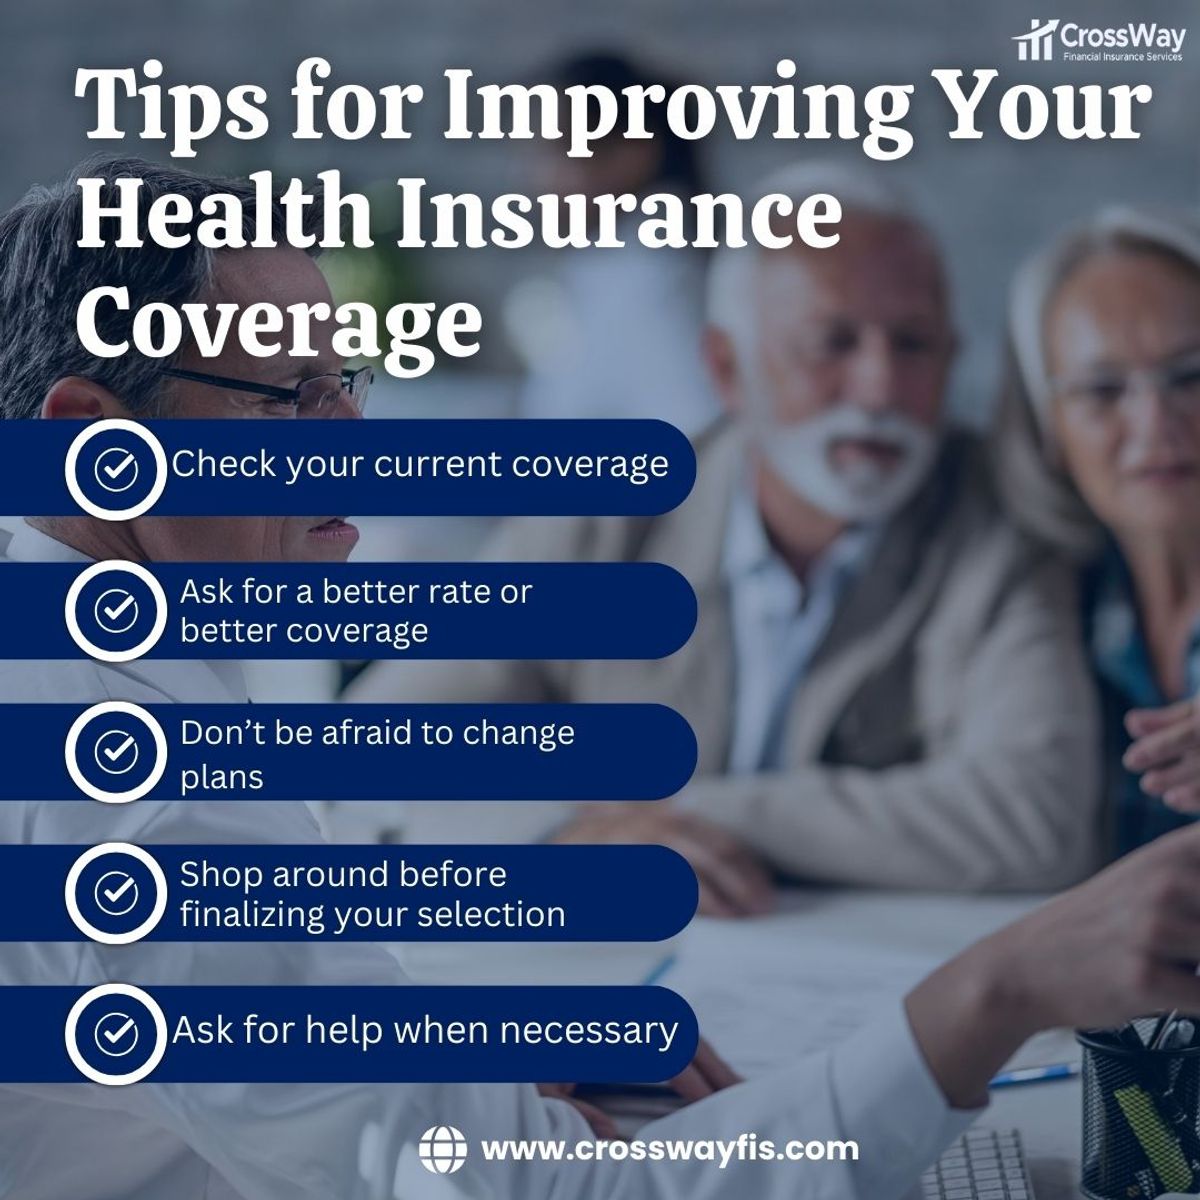 Discover the ultimate guide to elevating your Health Insurance coverage and securing a brighter and healthier future. #crossWayFIS #HealthInsurance #HealthSavingsAccount #HealthCoverage #HealthcareOptions #StayInsured #ProtectYourHealth #InsuranceMatters #CoverageOptions